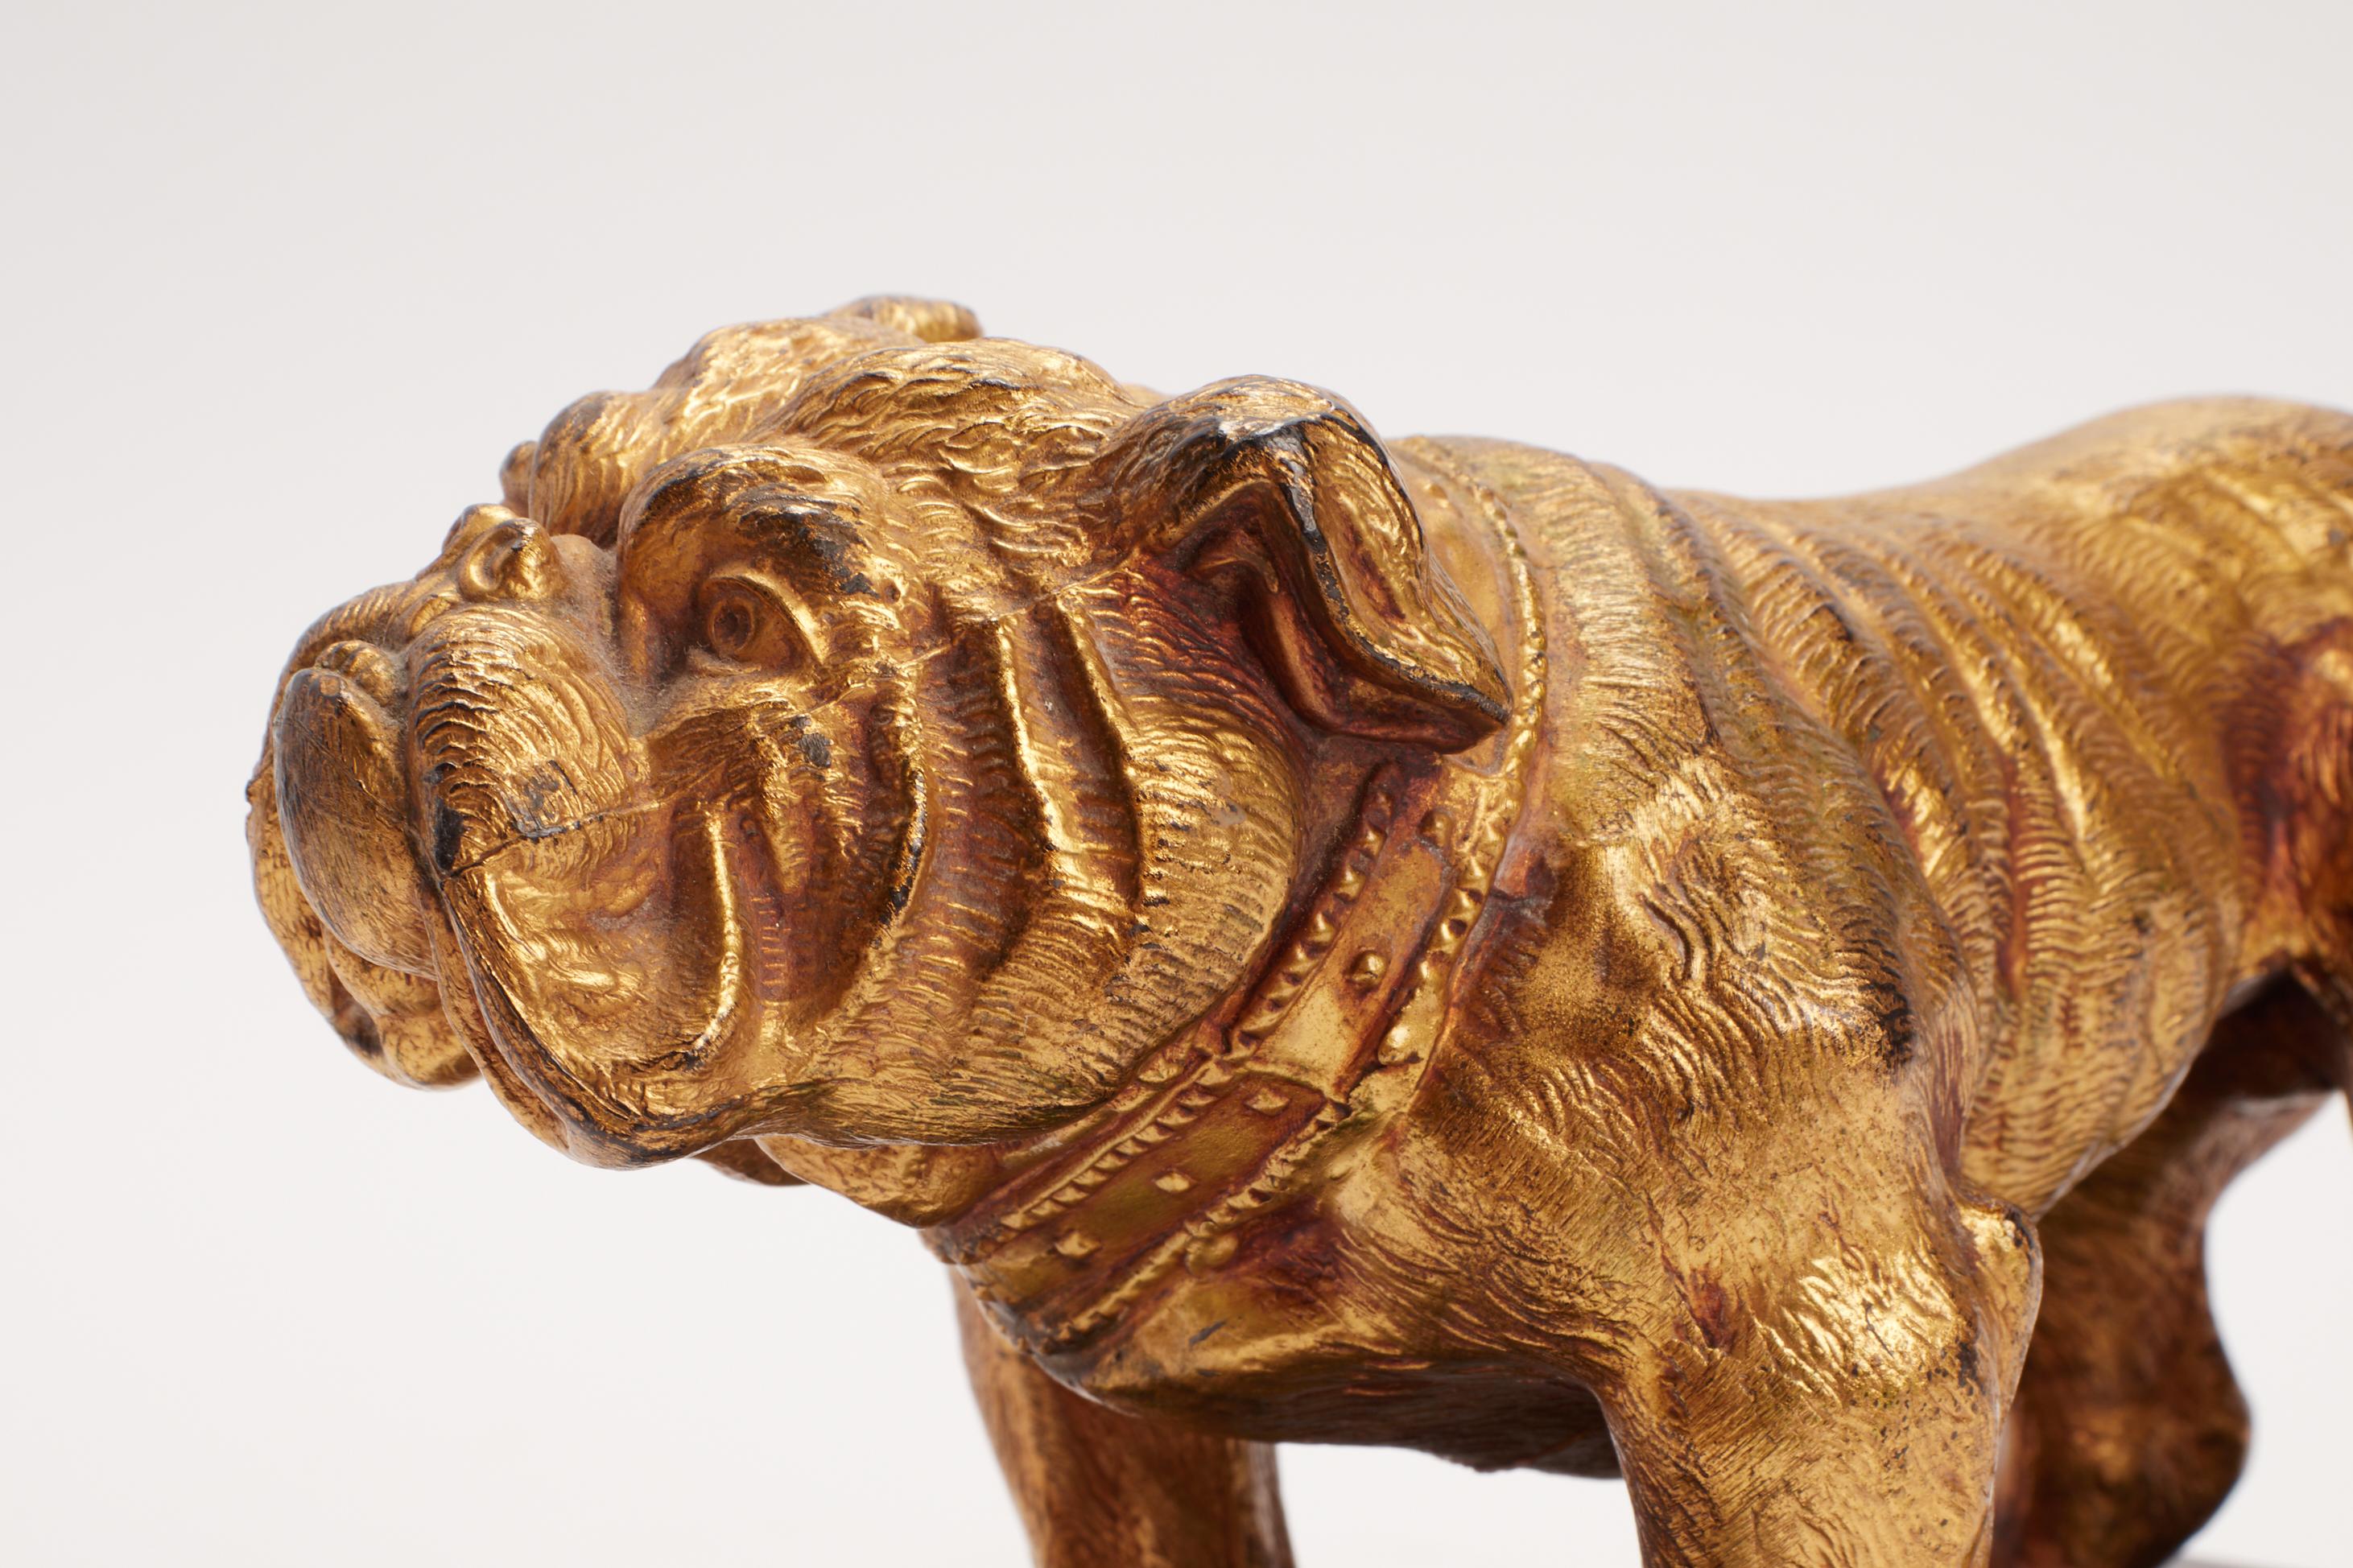 19th Century Bulldog dog sculpture signed J.B. Made in America late 19th century.  For Sale